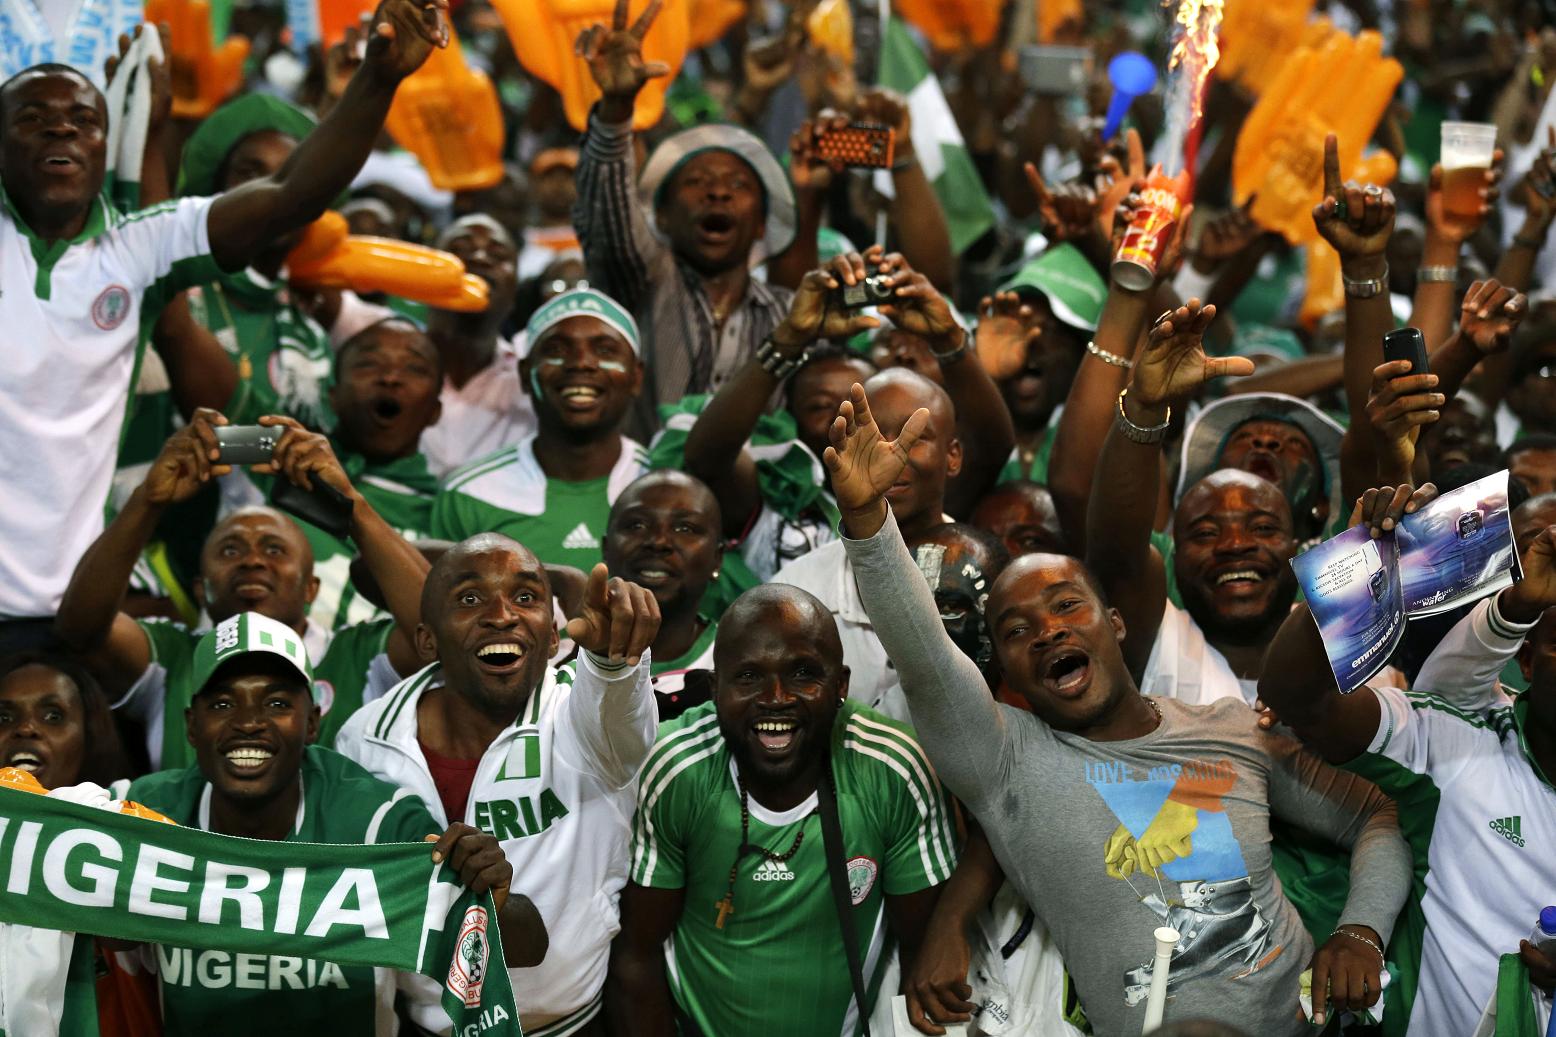 Nigeria fans celebrate in the stands ...new controversies